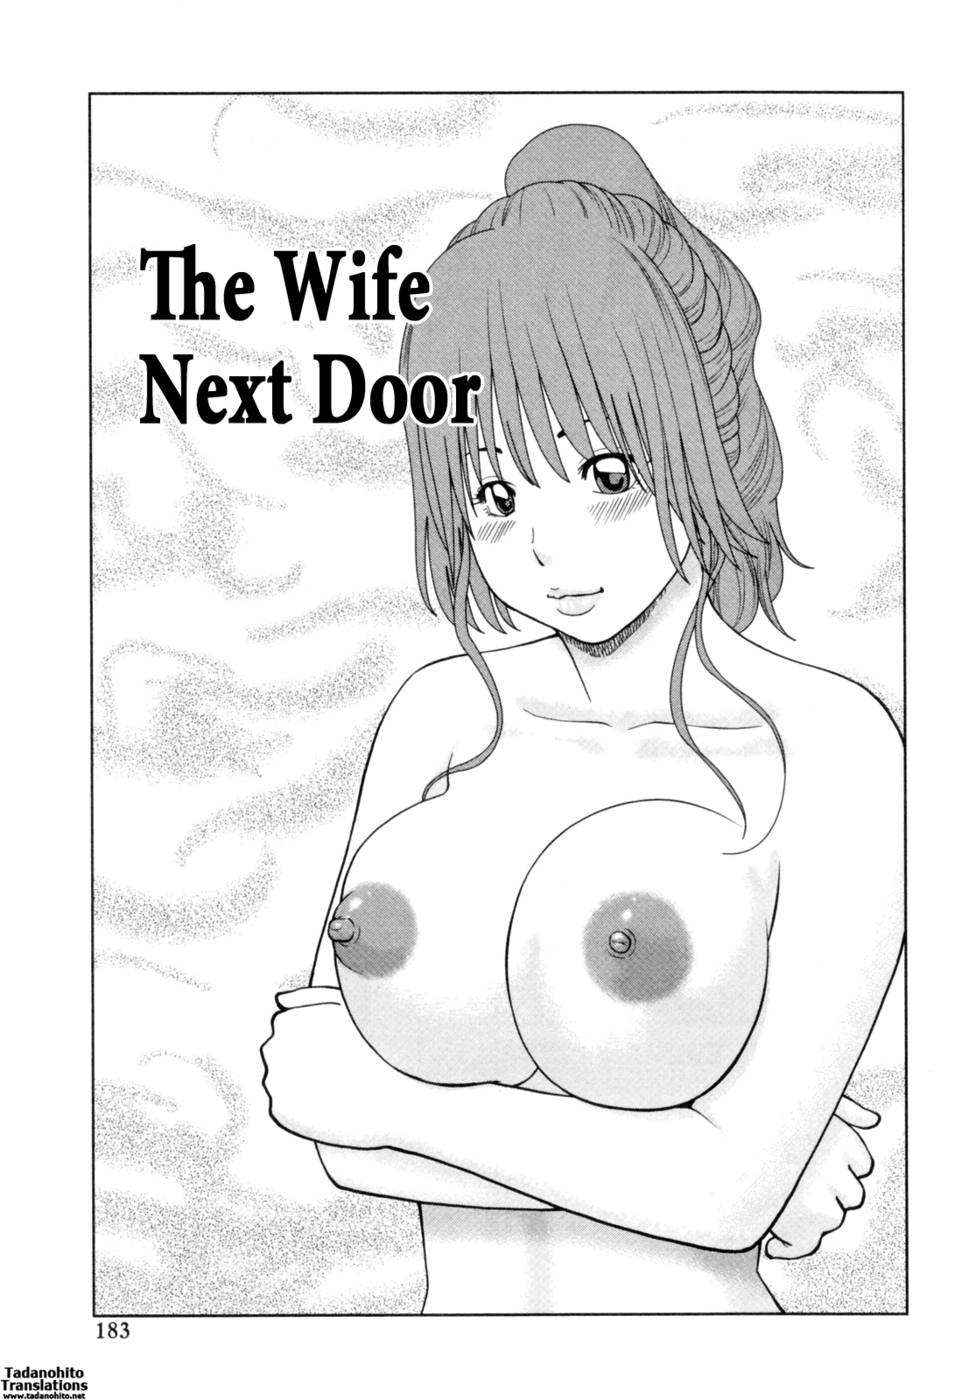 Hentai Manga Comic-32 Year Old Unsatisfied Wife-Chapter 10-The Wife Next Door-1